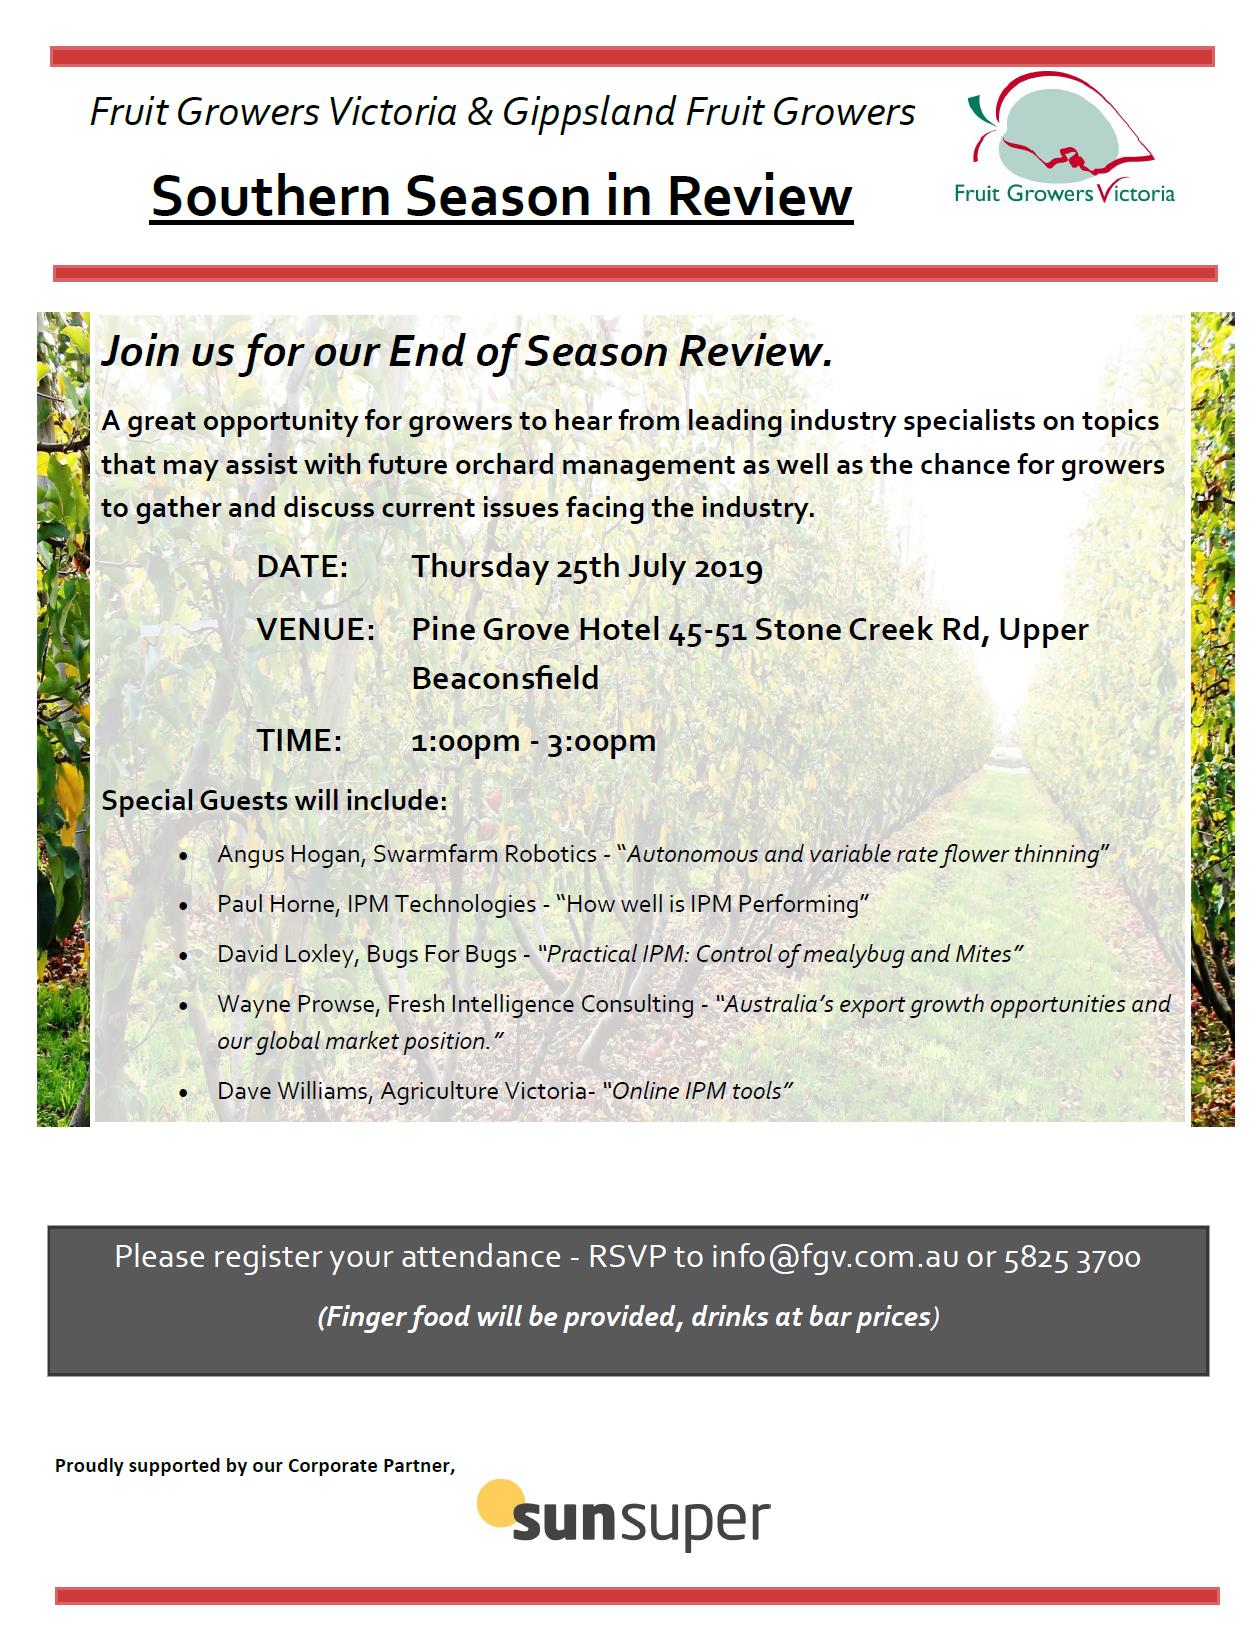 Fruit Growers Victoria & Gippsland Fruit Growers '2019 Southern Season in Review'